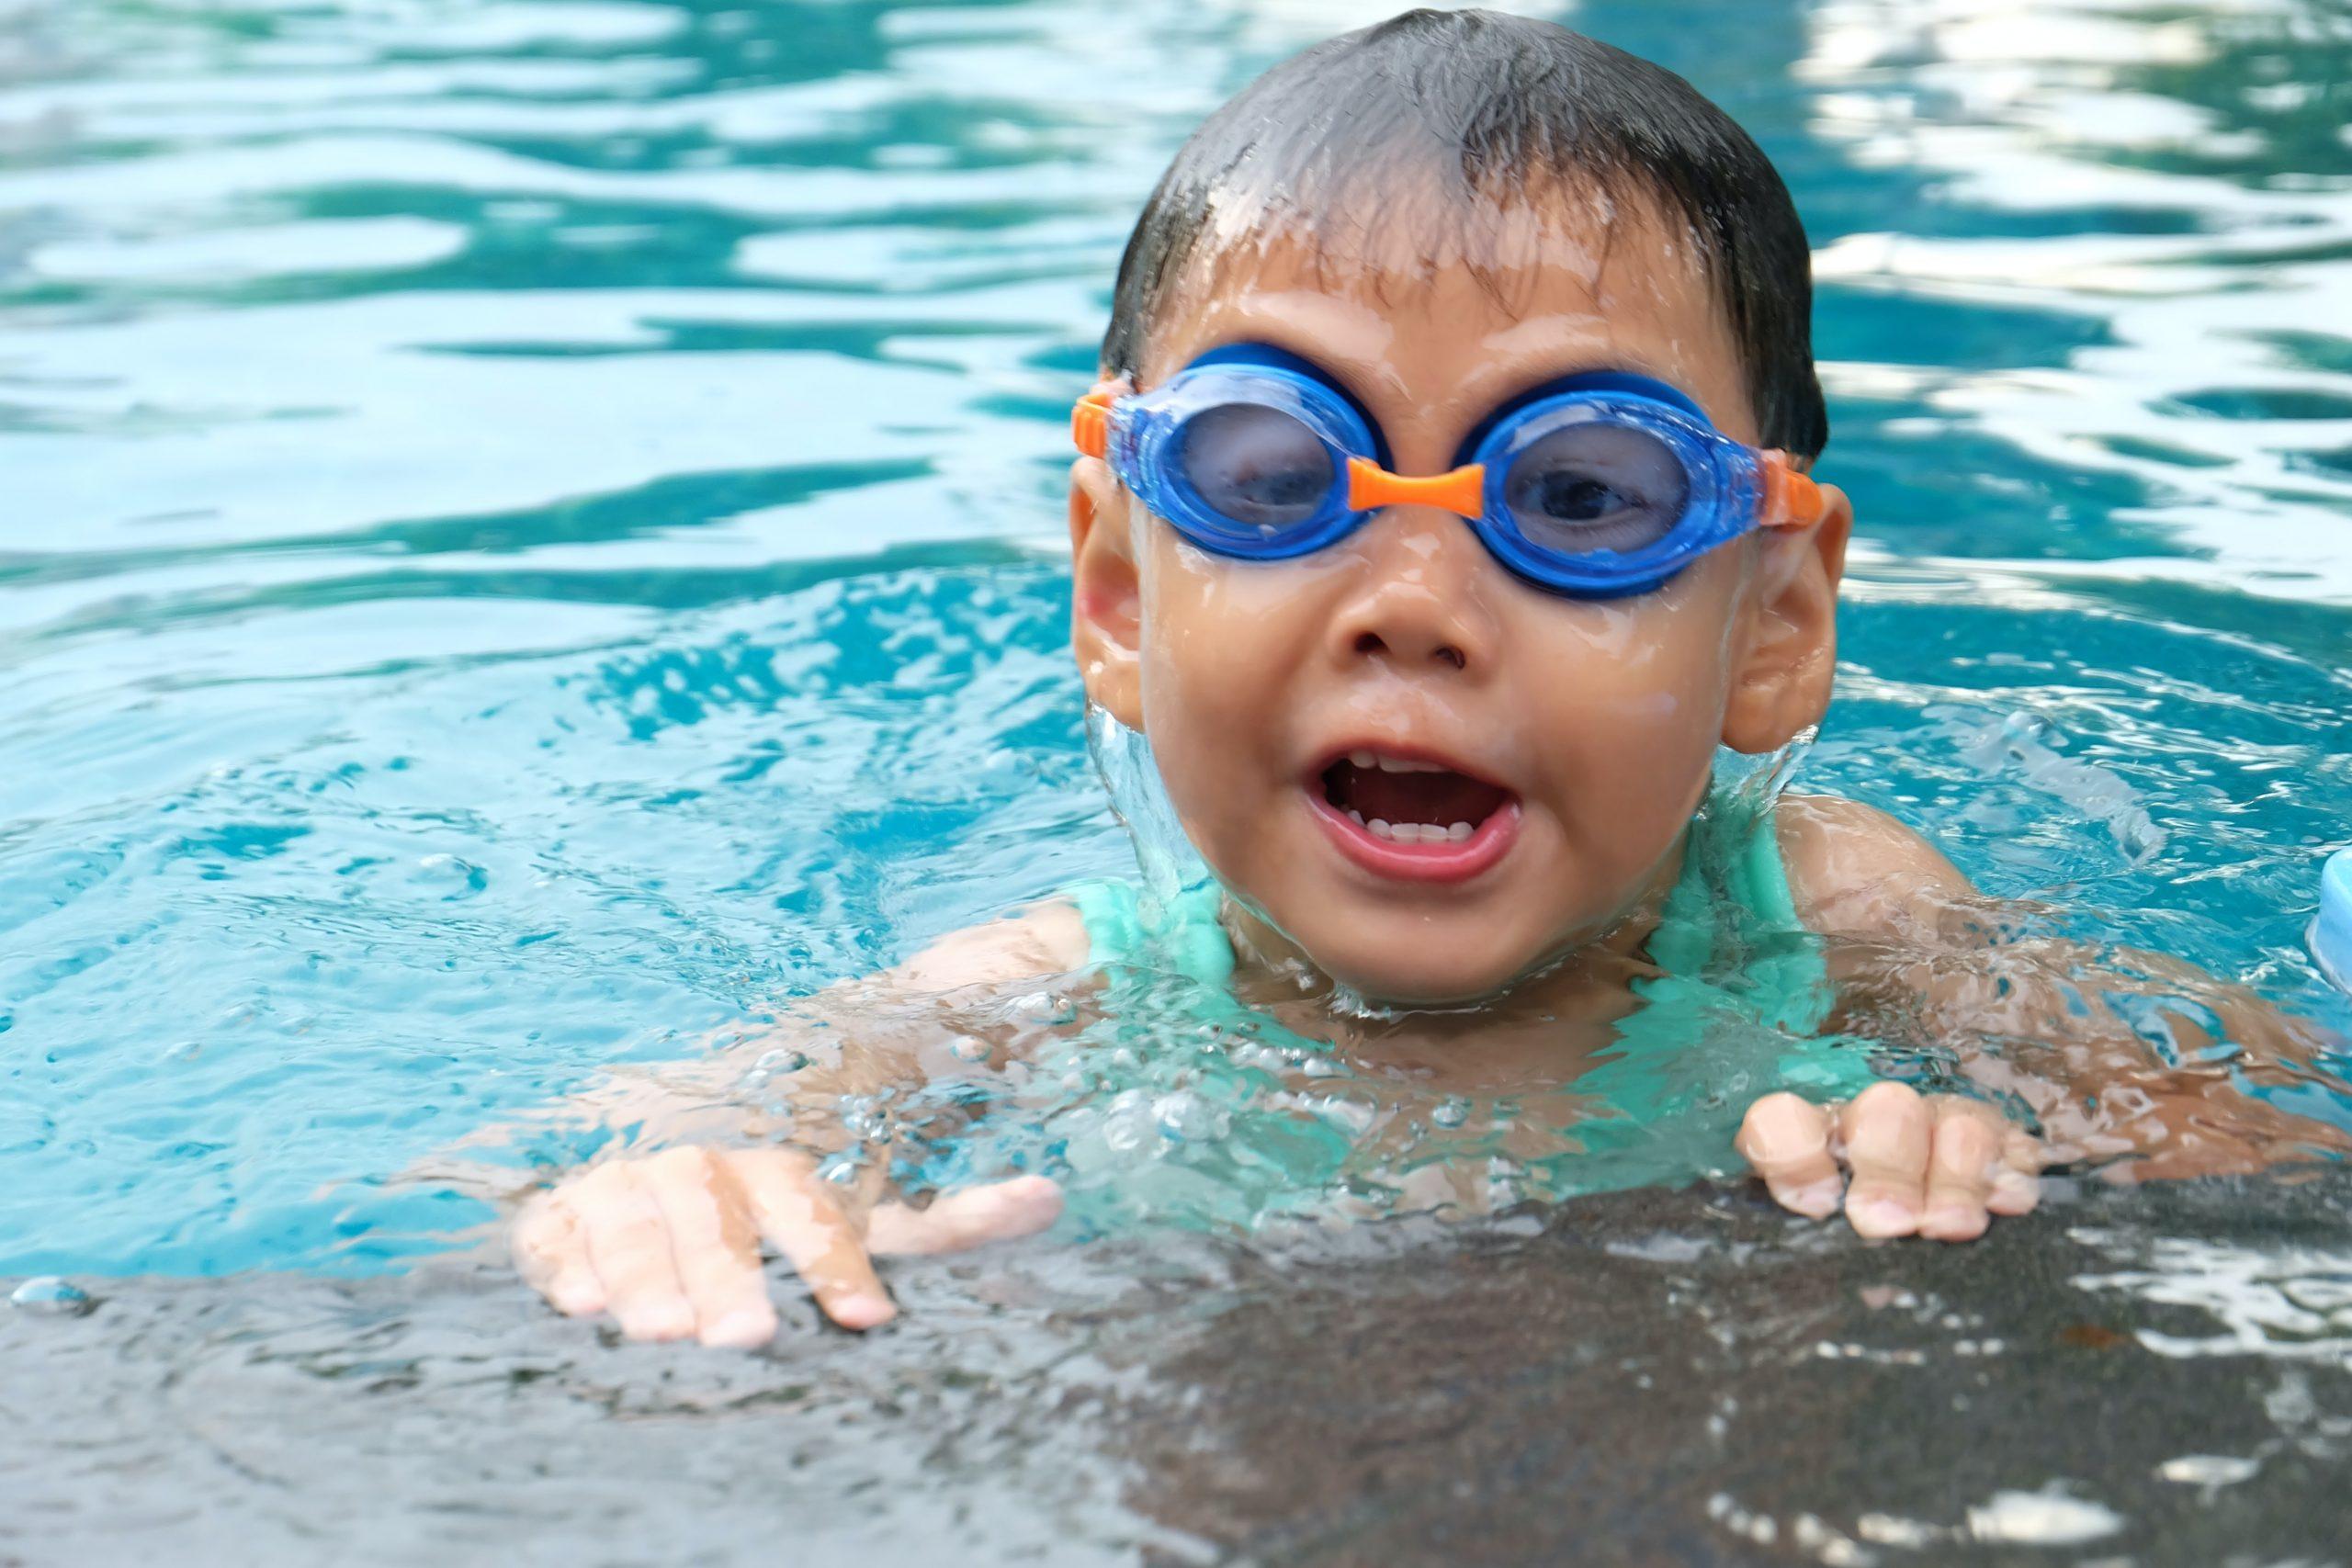 How to keep my kids safe in an above ground pool – Expert’s advice